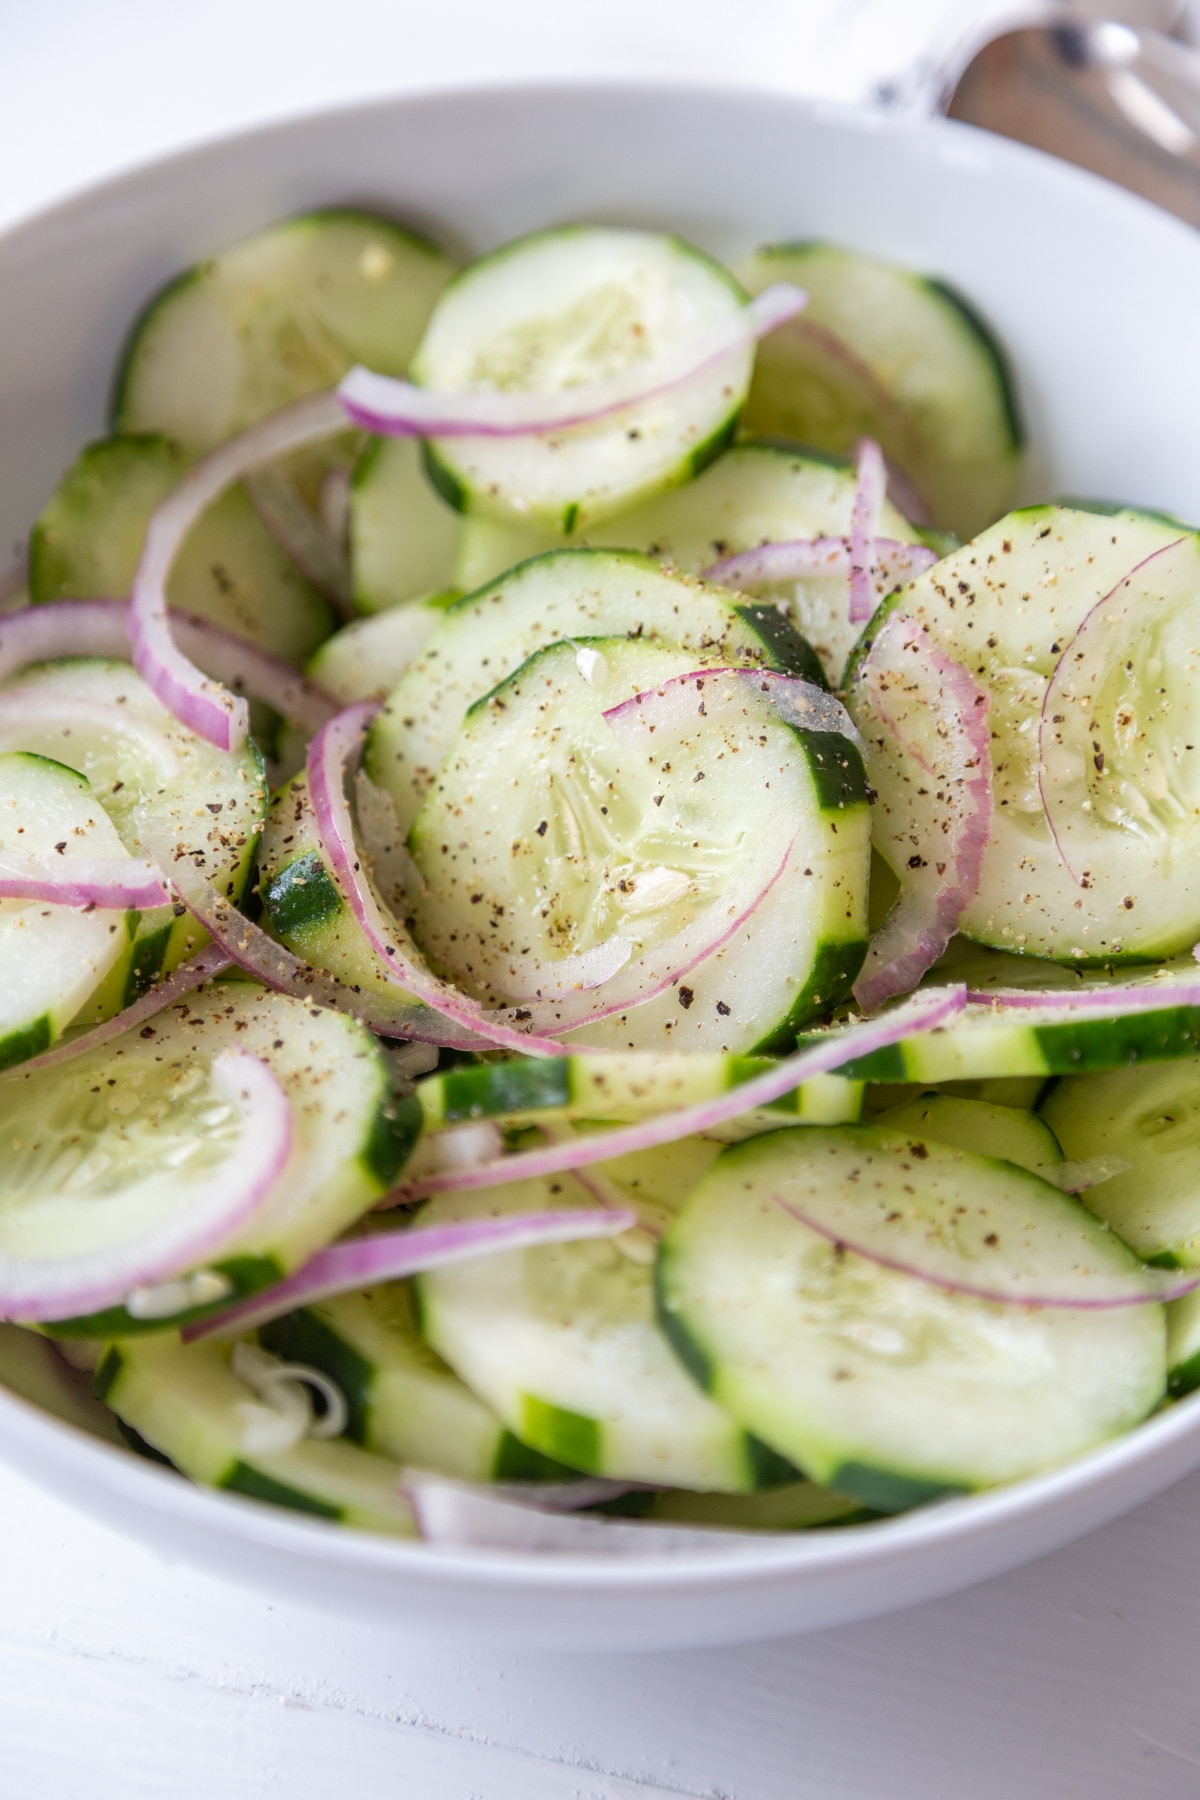 Cucumber and red onion salad in a white bowl being tossed with a silver spoon.